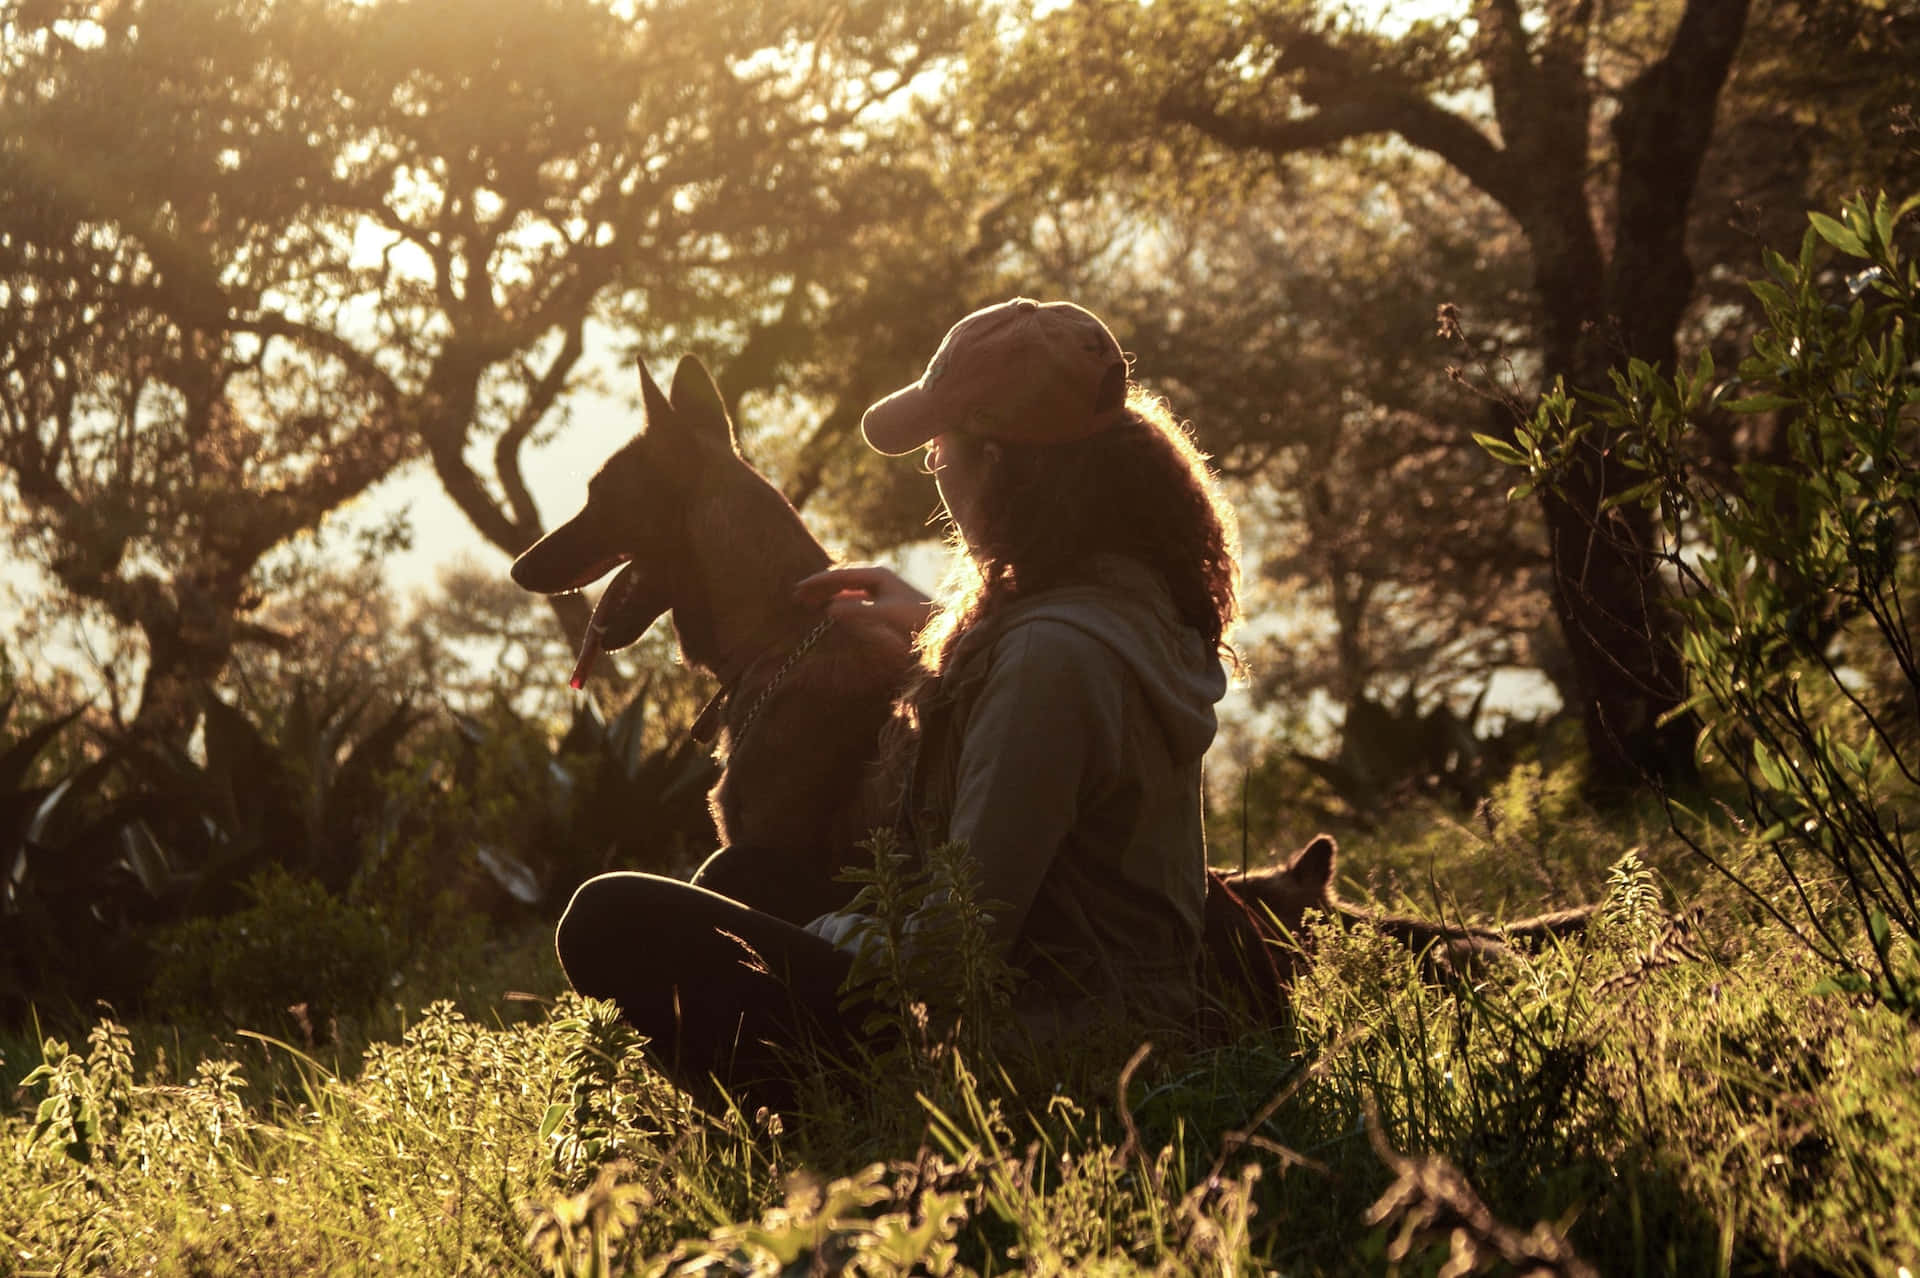 Caption: Woman And Her Beloved Dog Enjoying A Tranquil Sunset Wallpaper